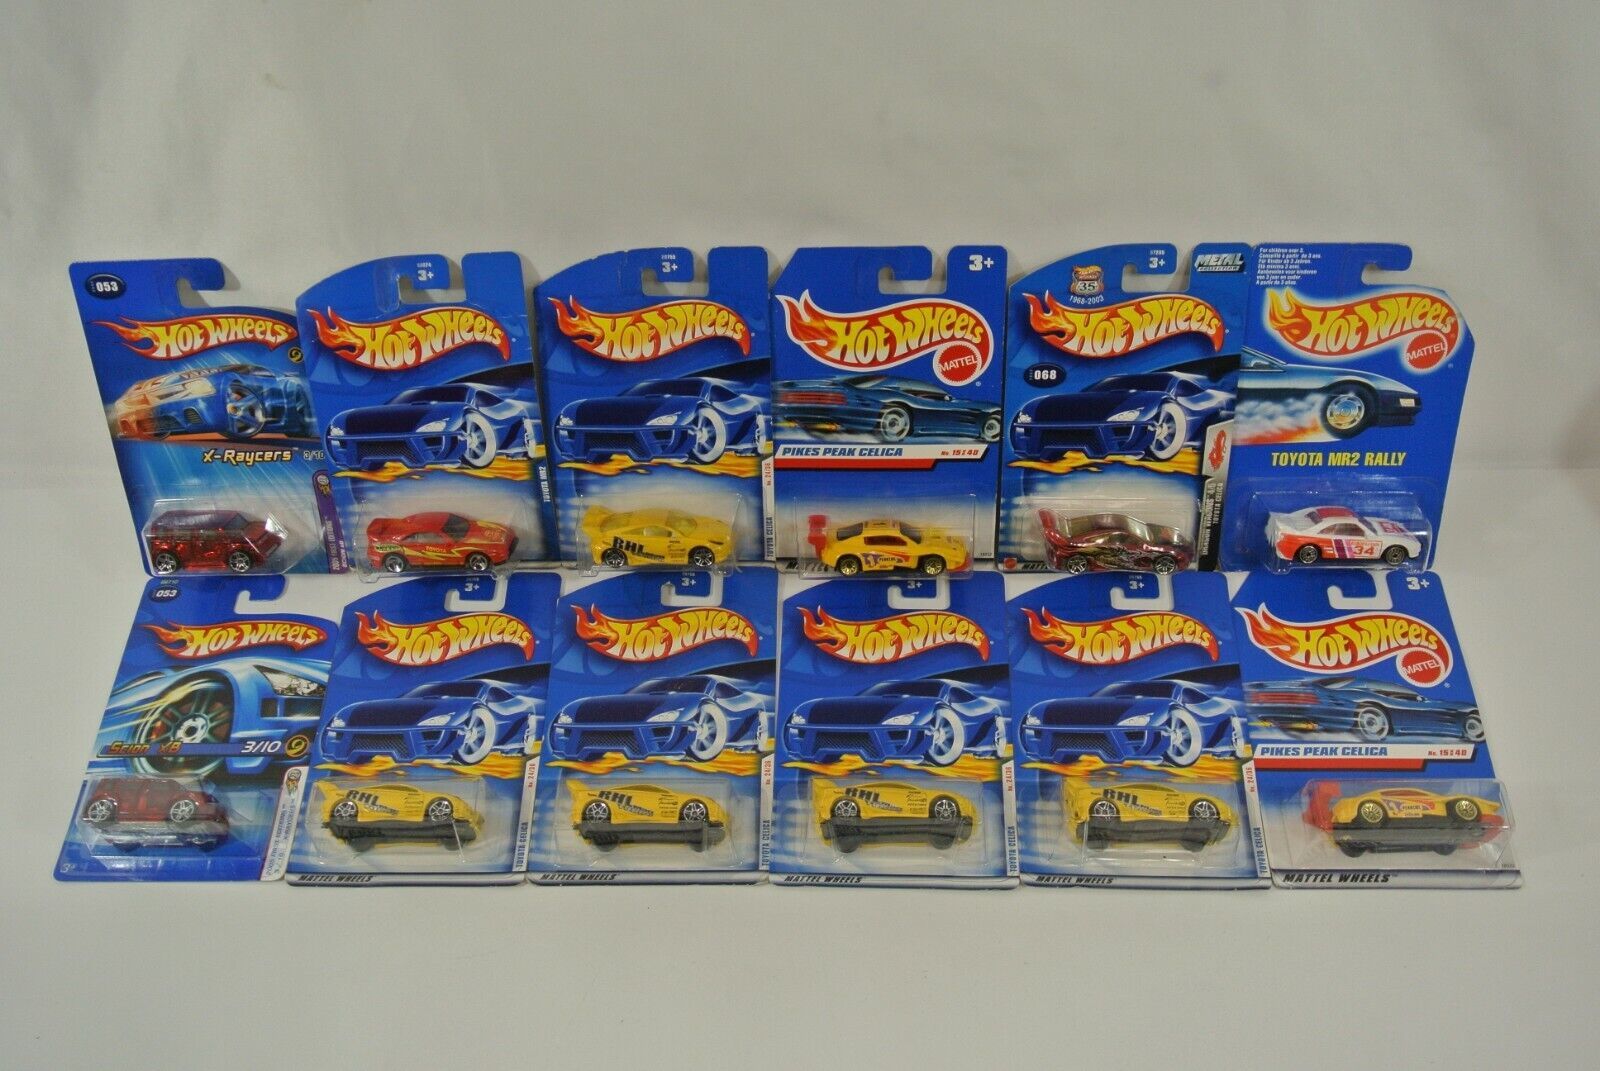 Primary image for Hot Wheels X-Raycers First Editions Dragon Wagons Toyota Scion XB Lot of 12 New